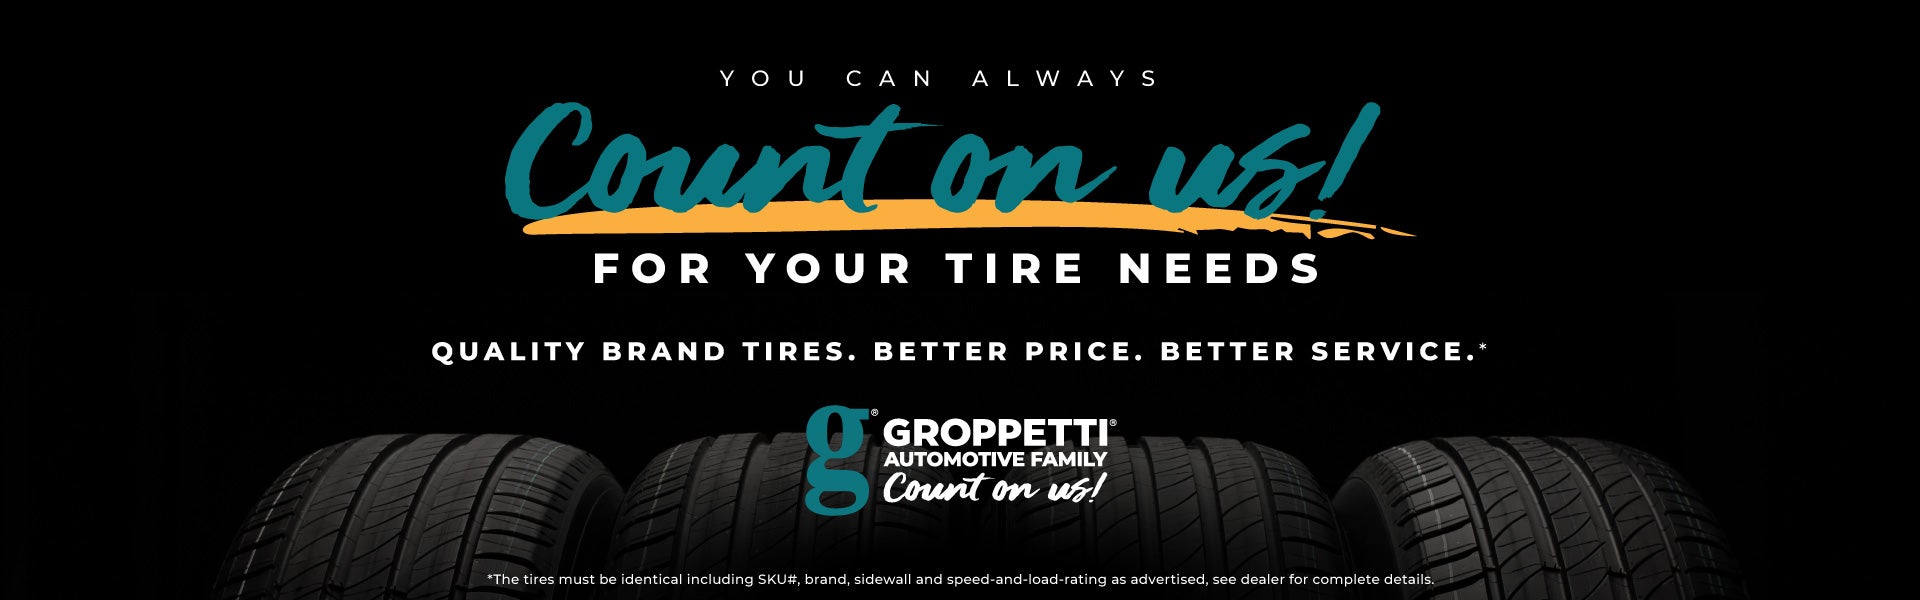 You Can Count On Us For Your Tire Needs!